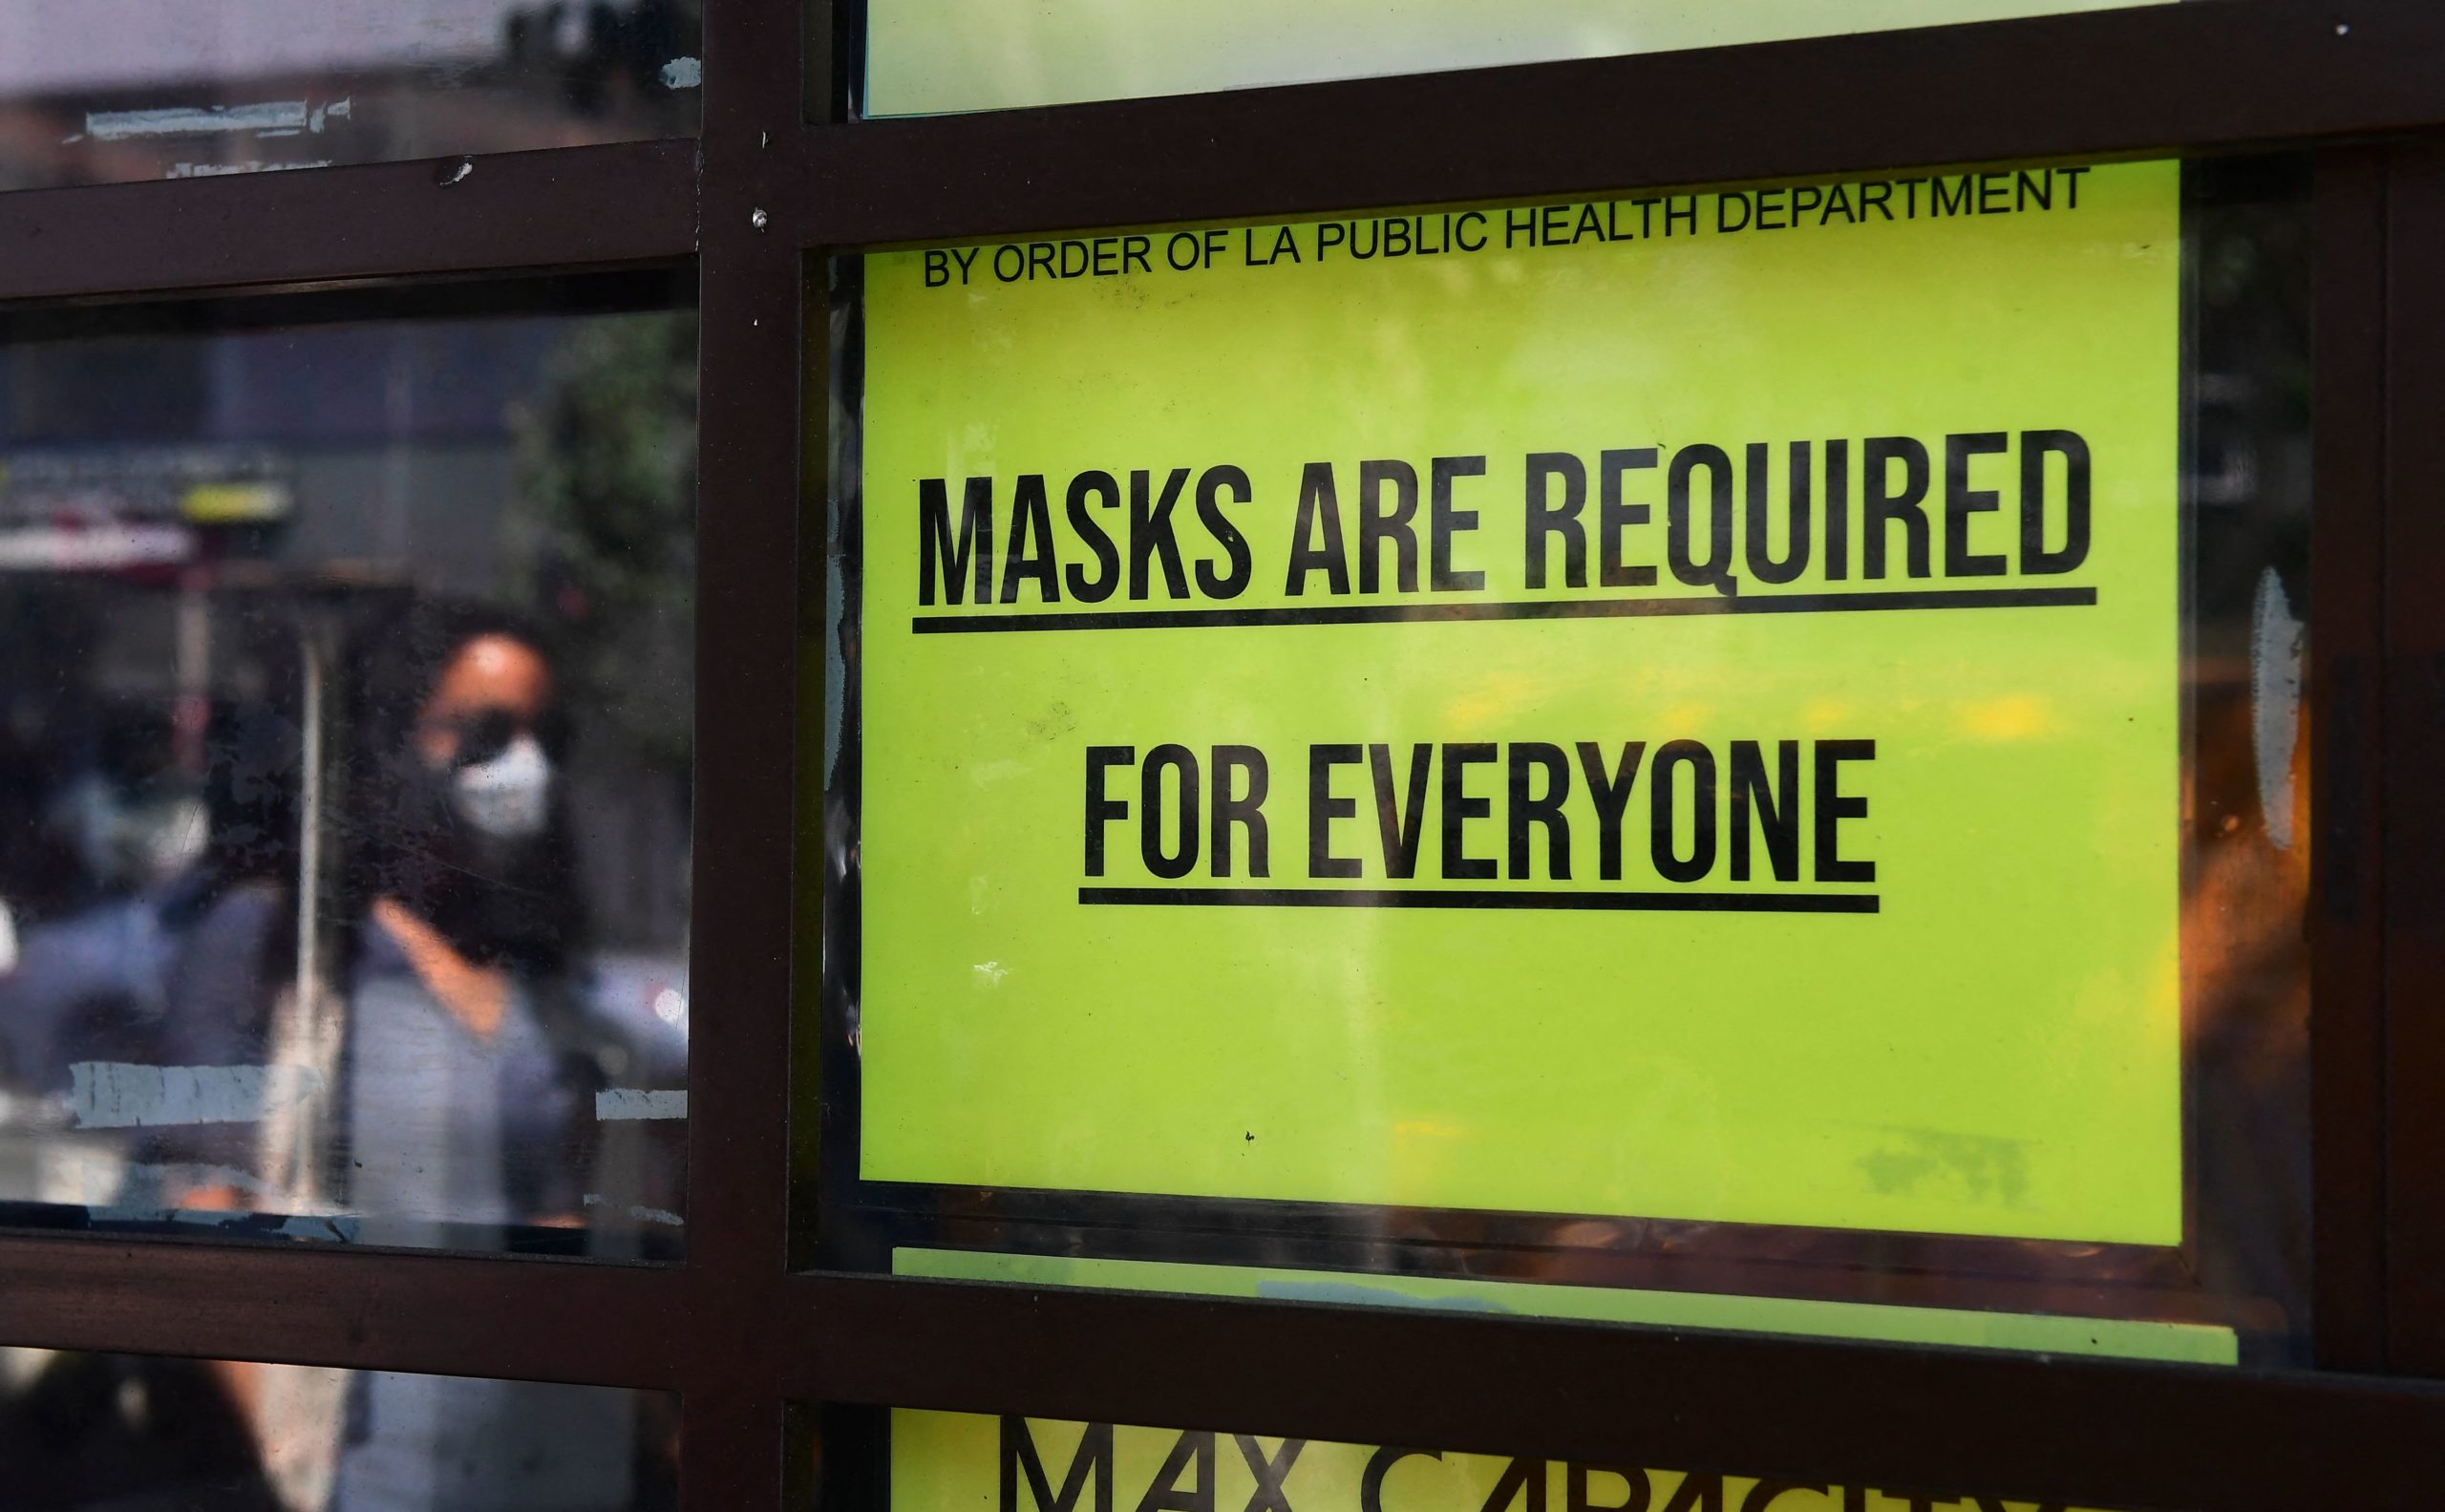 A storefront sign reminds people masks are for everyone on July 19, 2021 in Los Angeles, California. - A continuing resurgence in the Covid-19 pandemic is seeing local rates rise and hospitalizations skyrocket amid a new face-covering mandate that went into effect over the weekend. (Photo by Frederic J. BROWN / AFP) (Photo by FREDERIC J. BROWN/AFP via Getty Images)